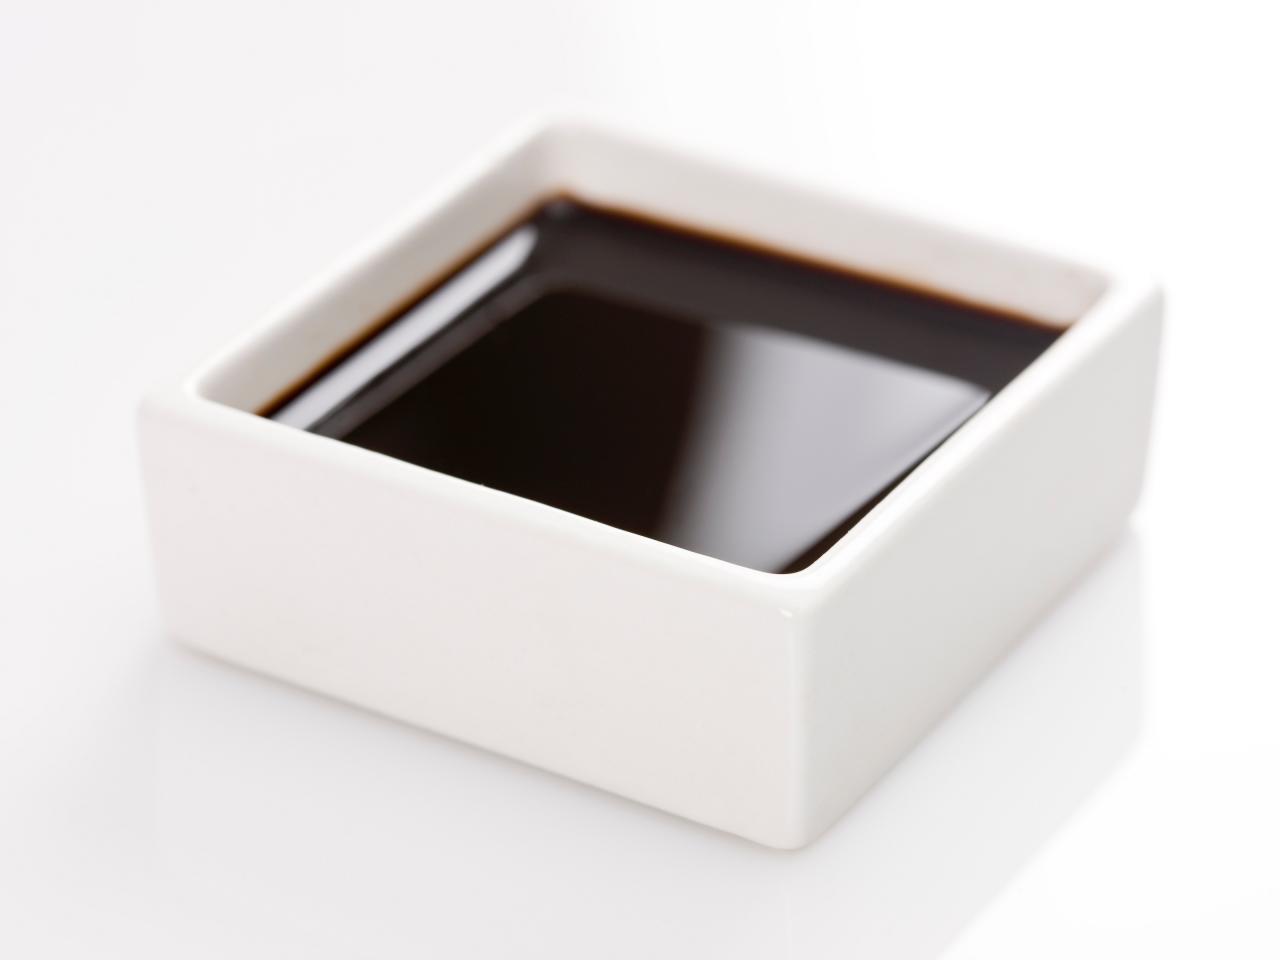 10 Best Soy Sauce Substitutes (+ Easy Recipe) - Wholesome Yum